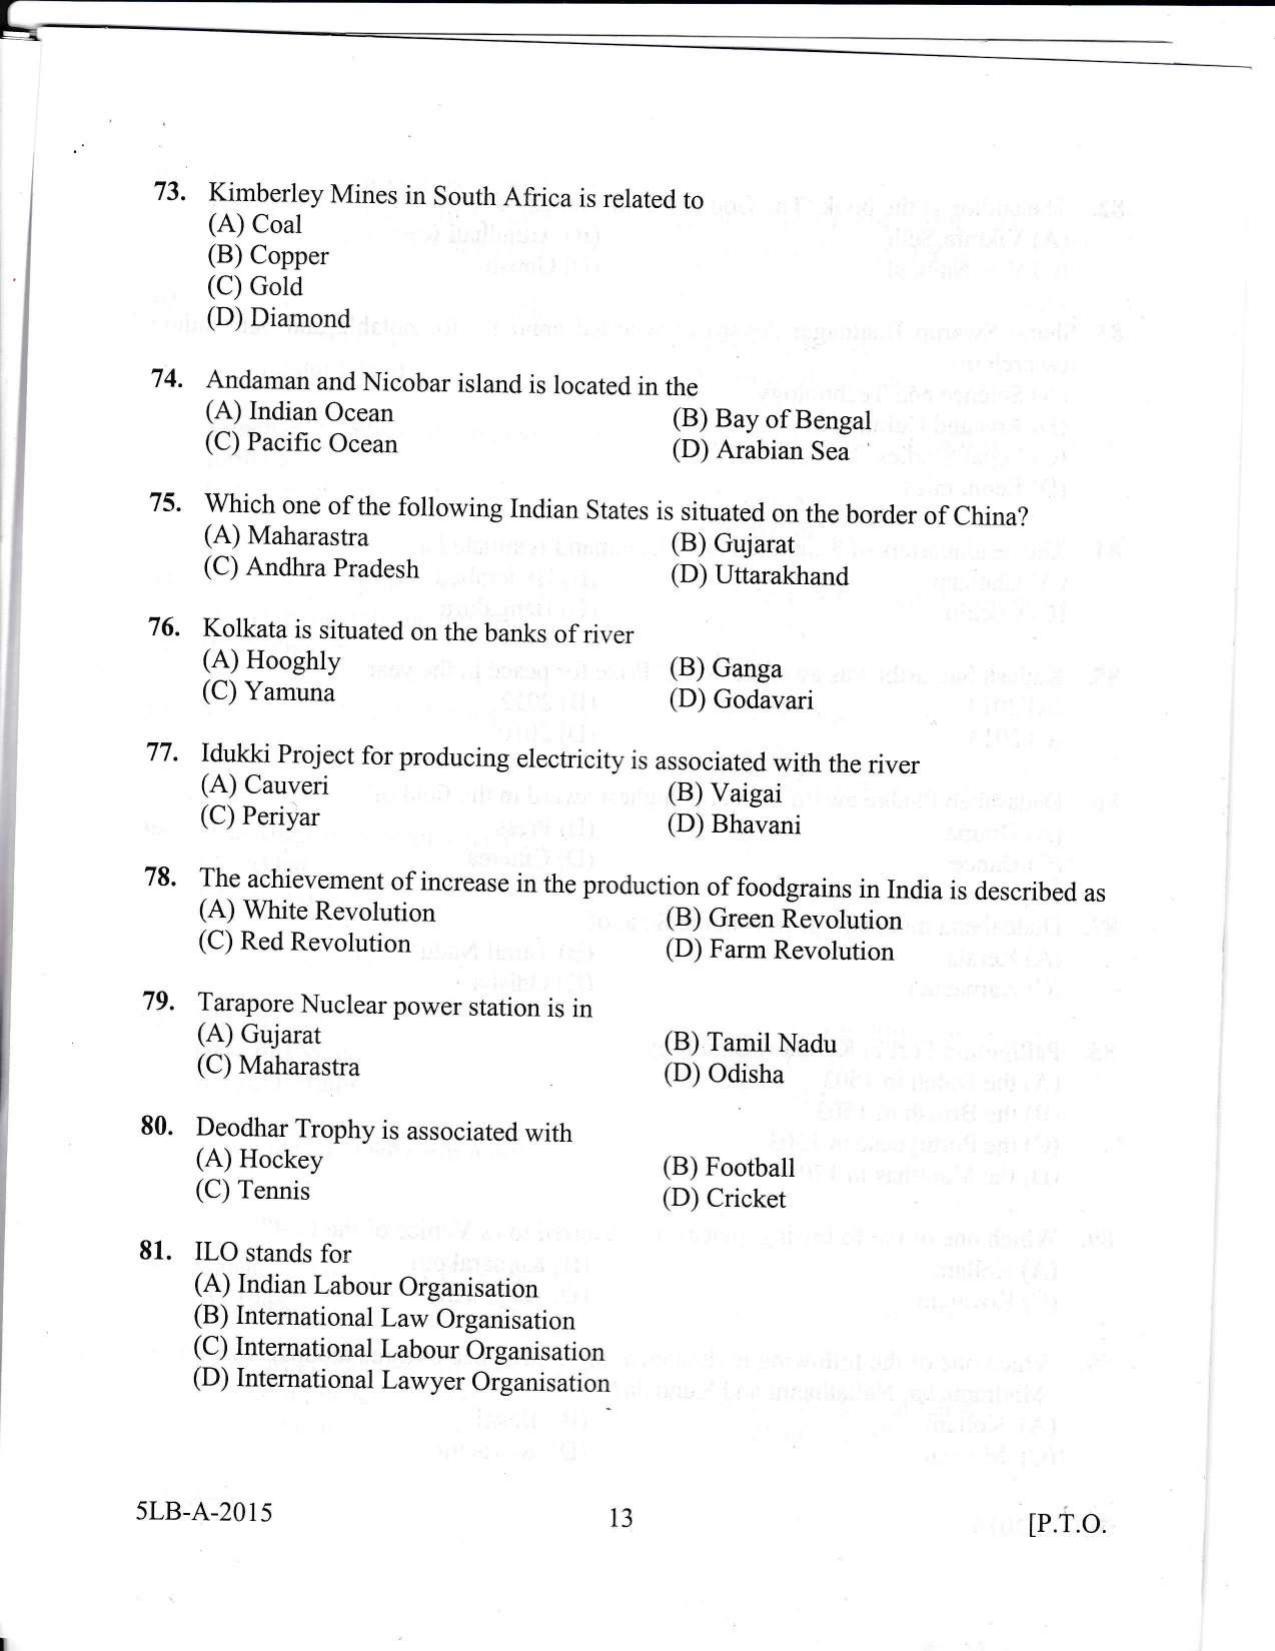 KLEE 5 Year LLB Exam 2015 Question Paper - Page 13